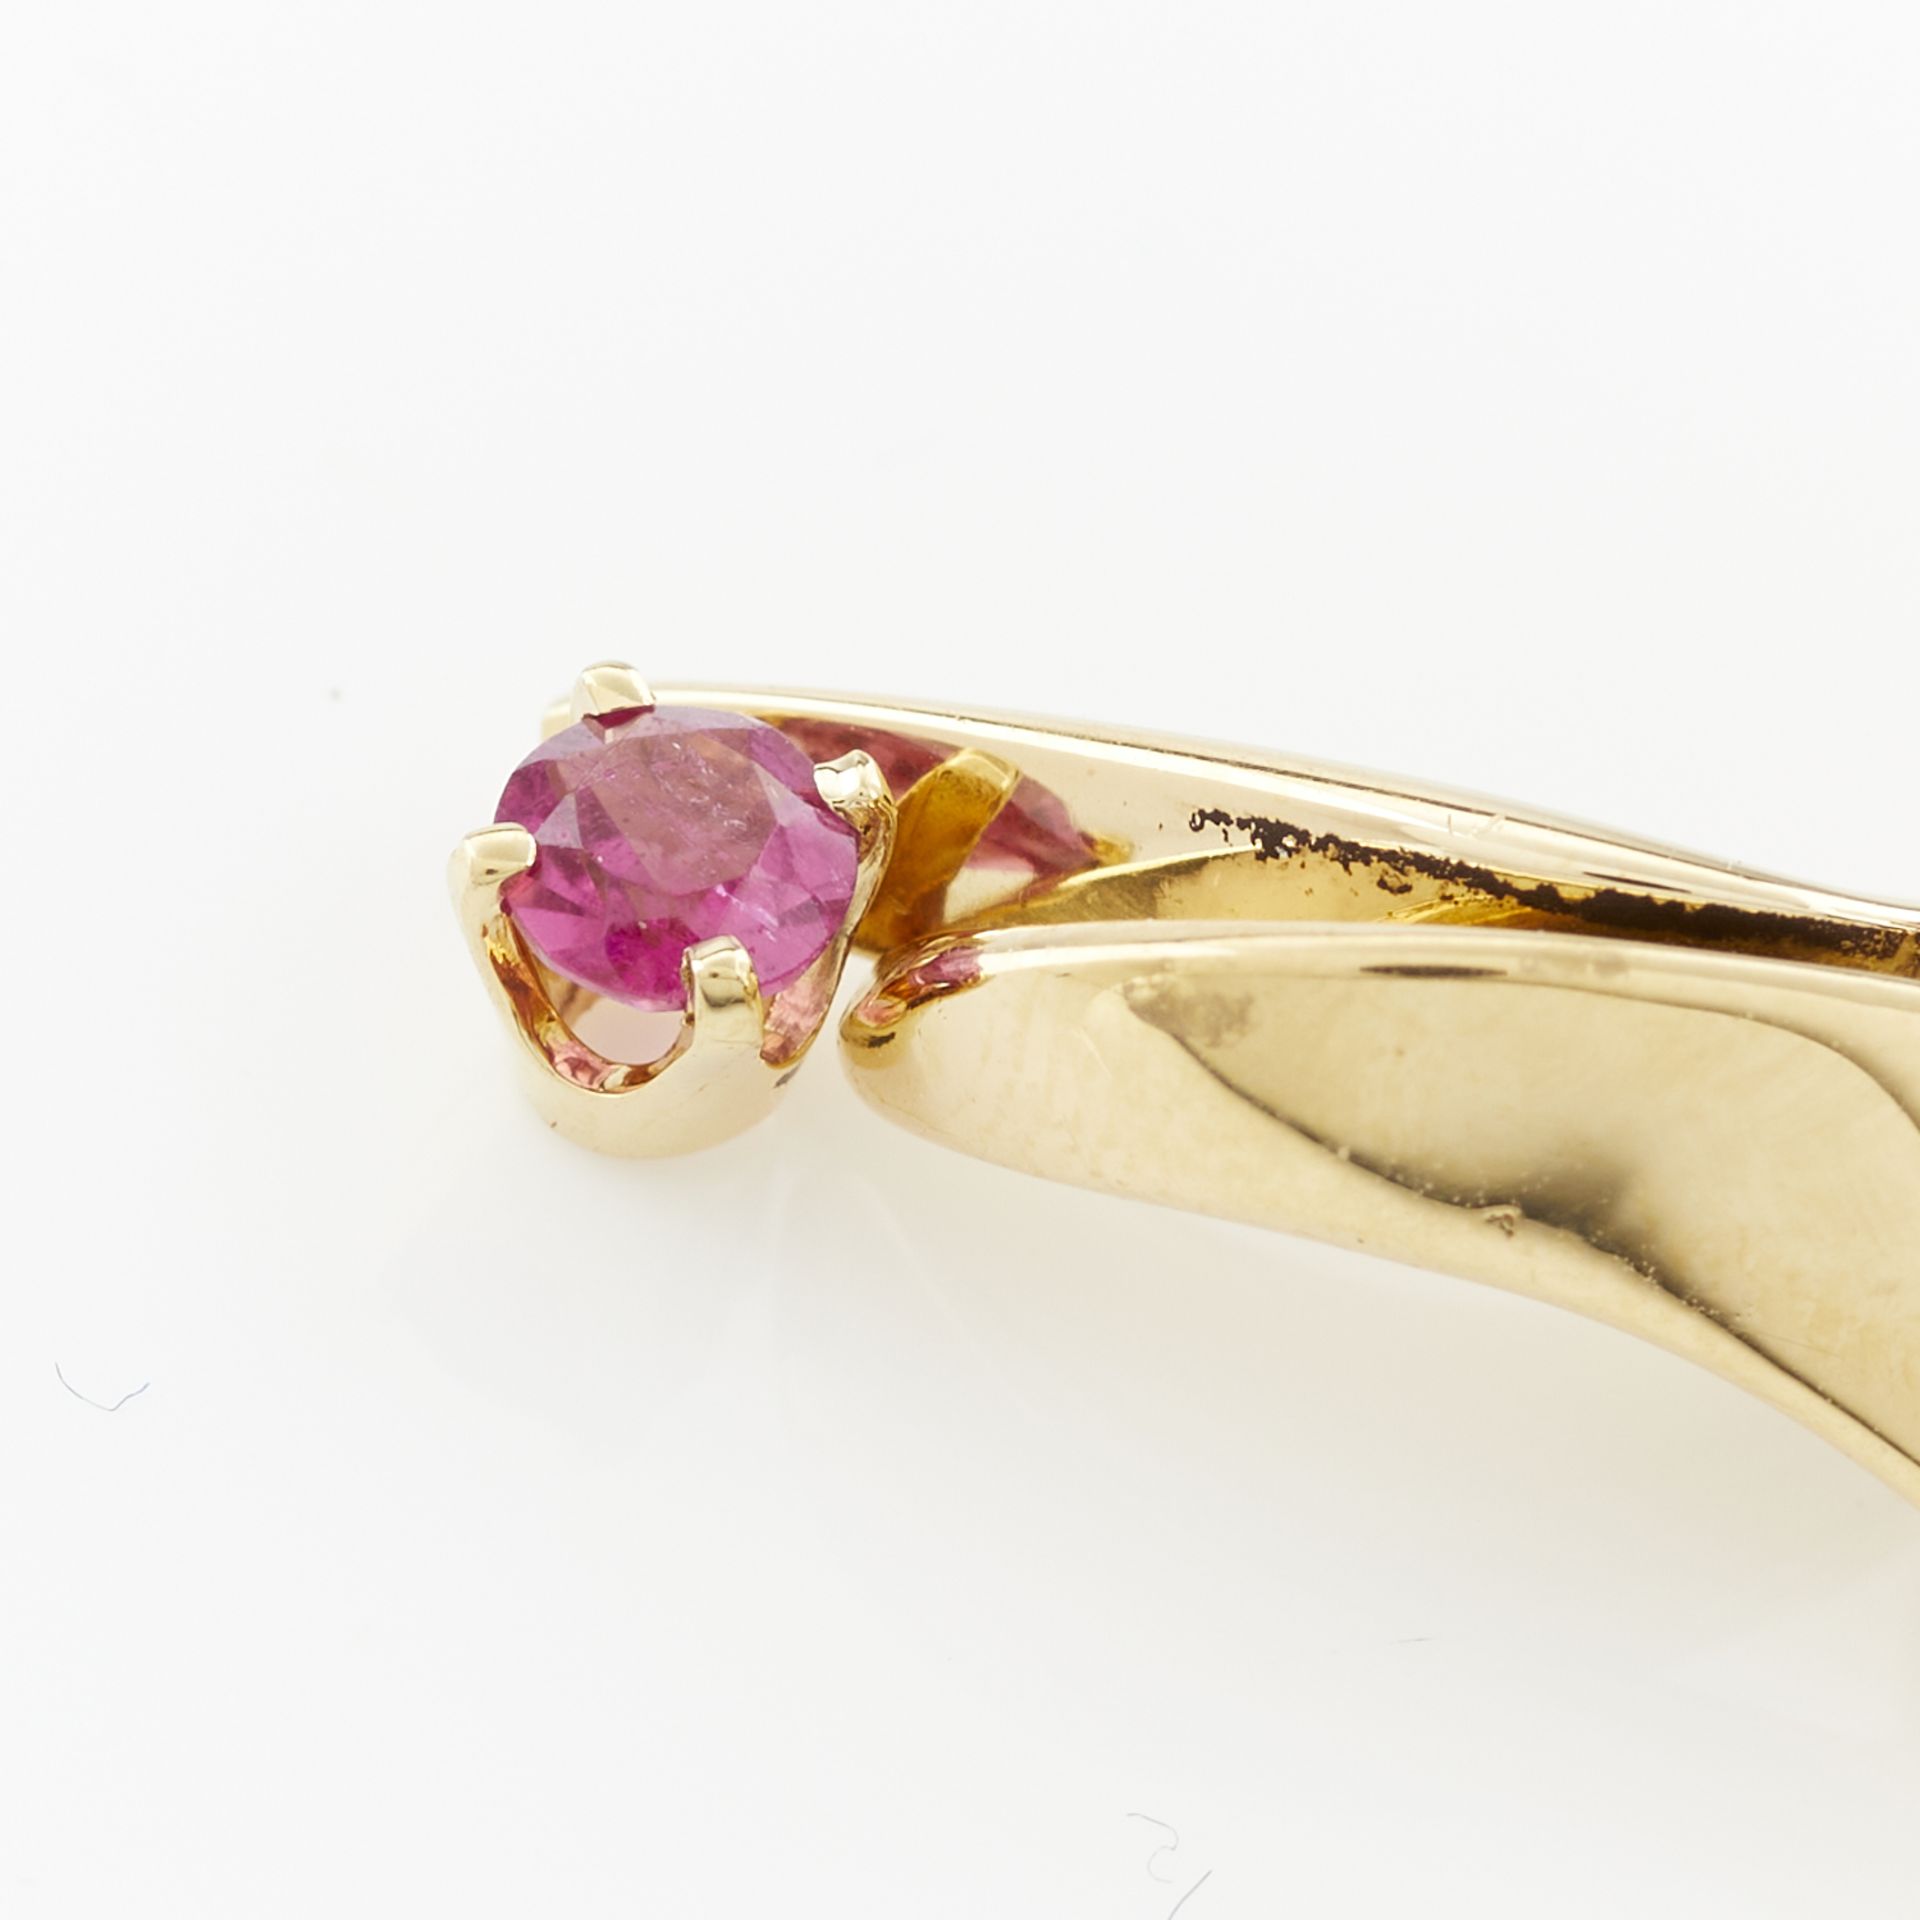 18k Gold Pendant with Amethyst & Citrine - Image 5 of 6